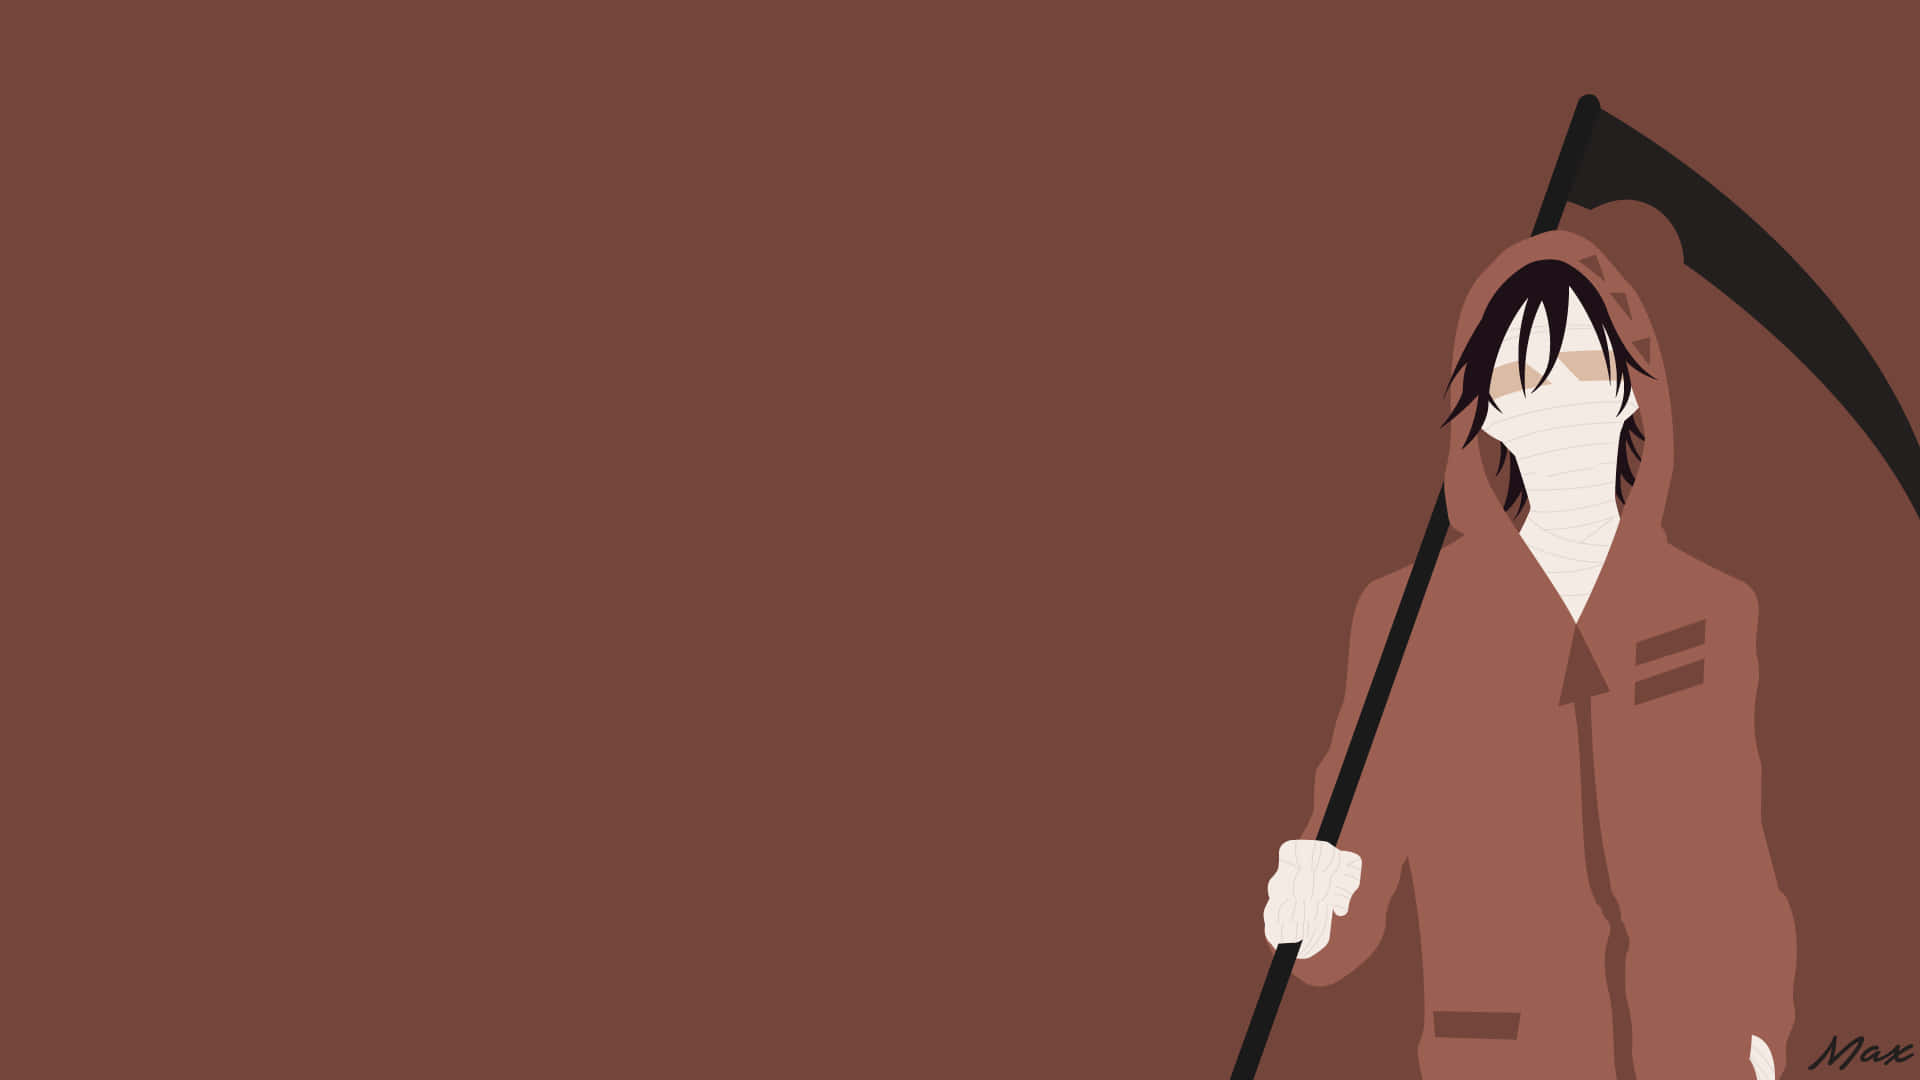 A Man Holding A Scythe With A Brown Background Wallpaper